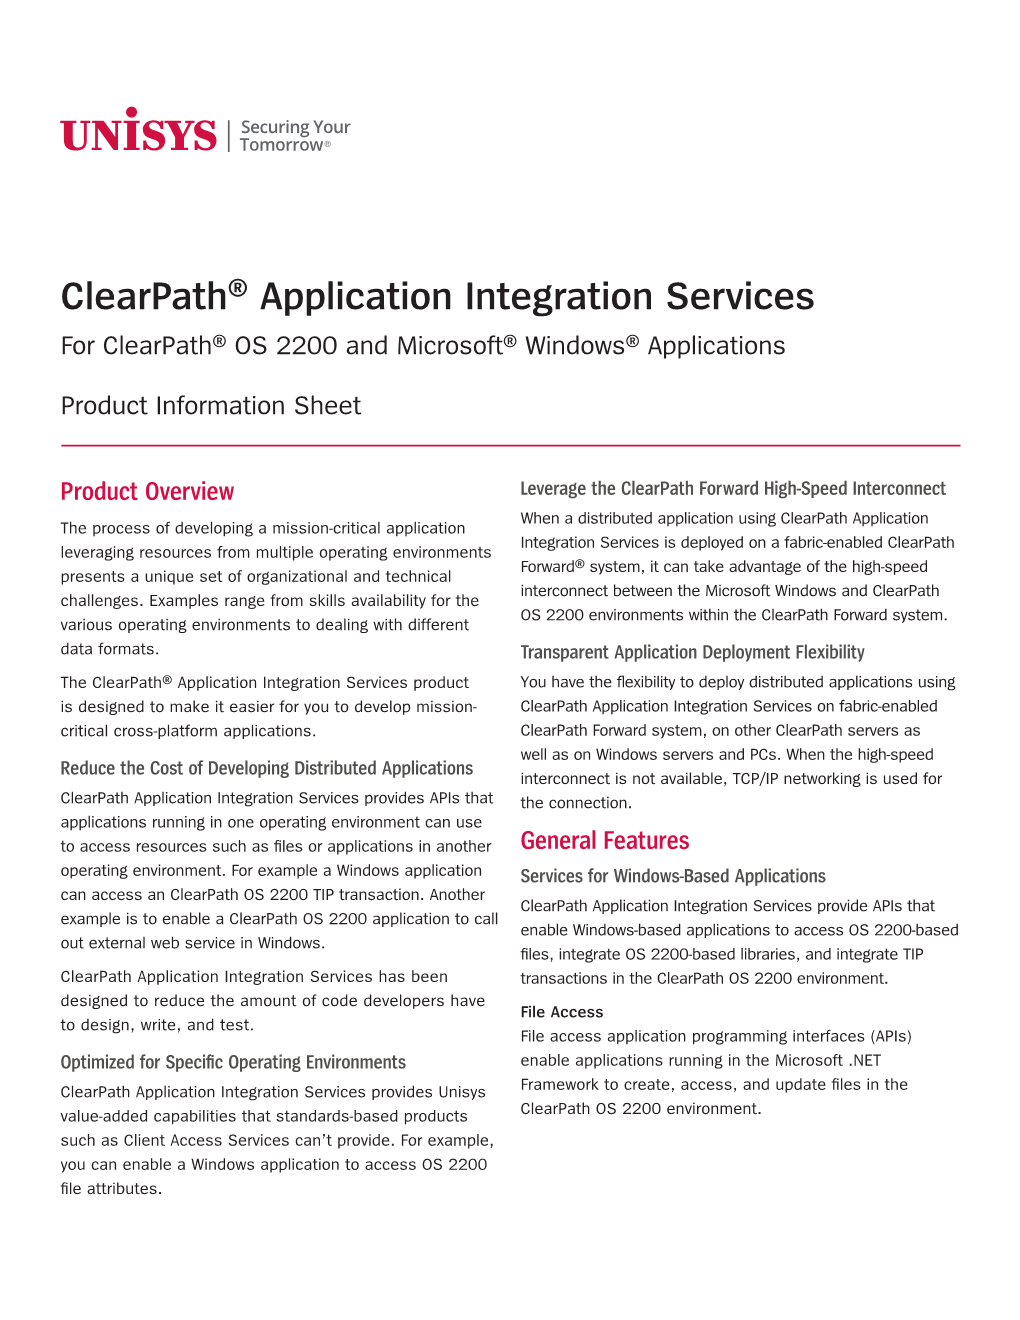 Clearpath® Application Integration Services for Clearpath® OS 2200 and Microsoft® Windows® Applications